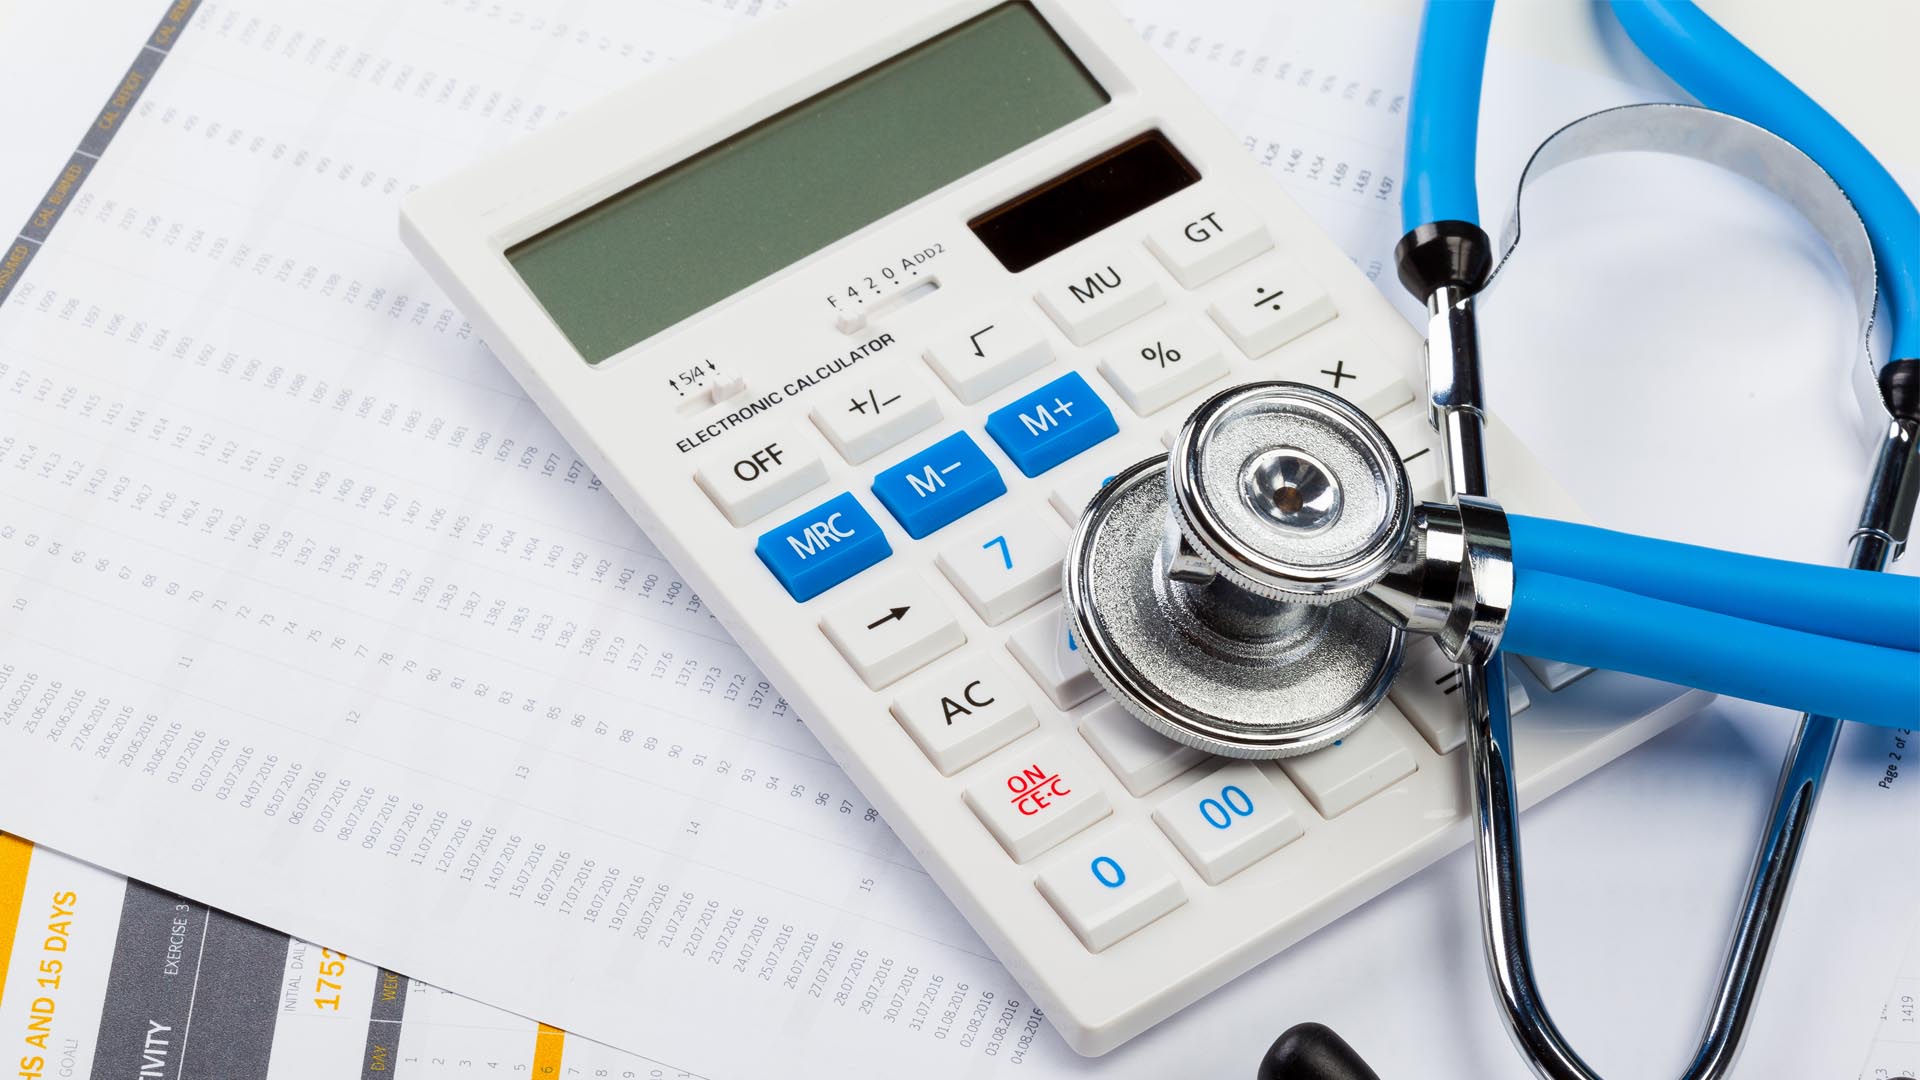 Inefficient Primary Care Has Higher ACO Costs